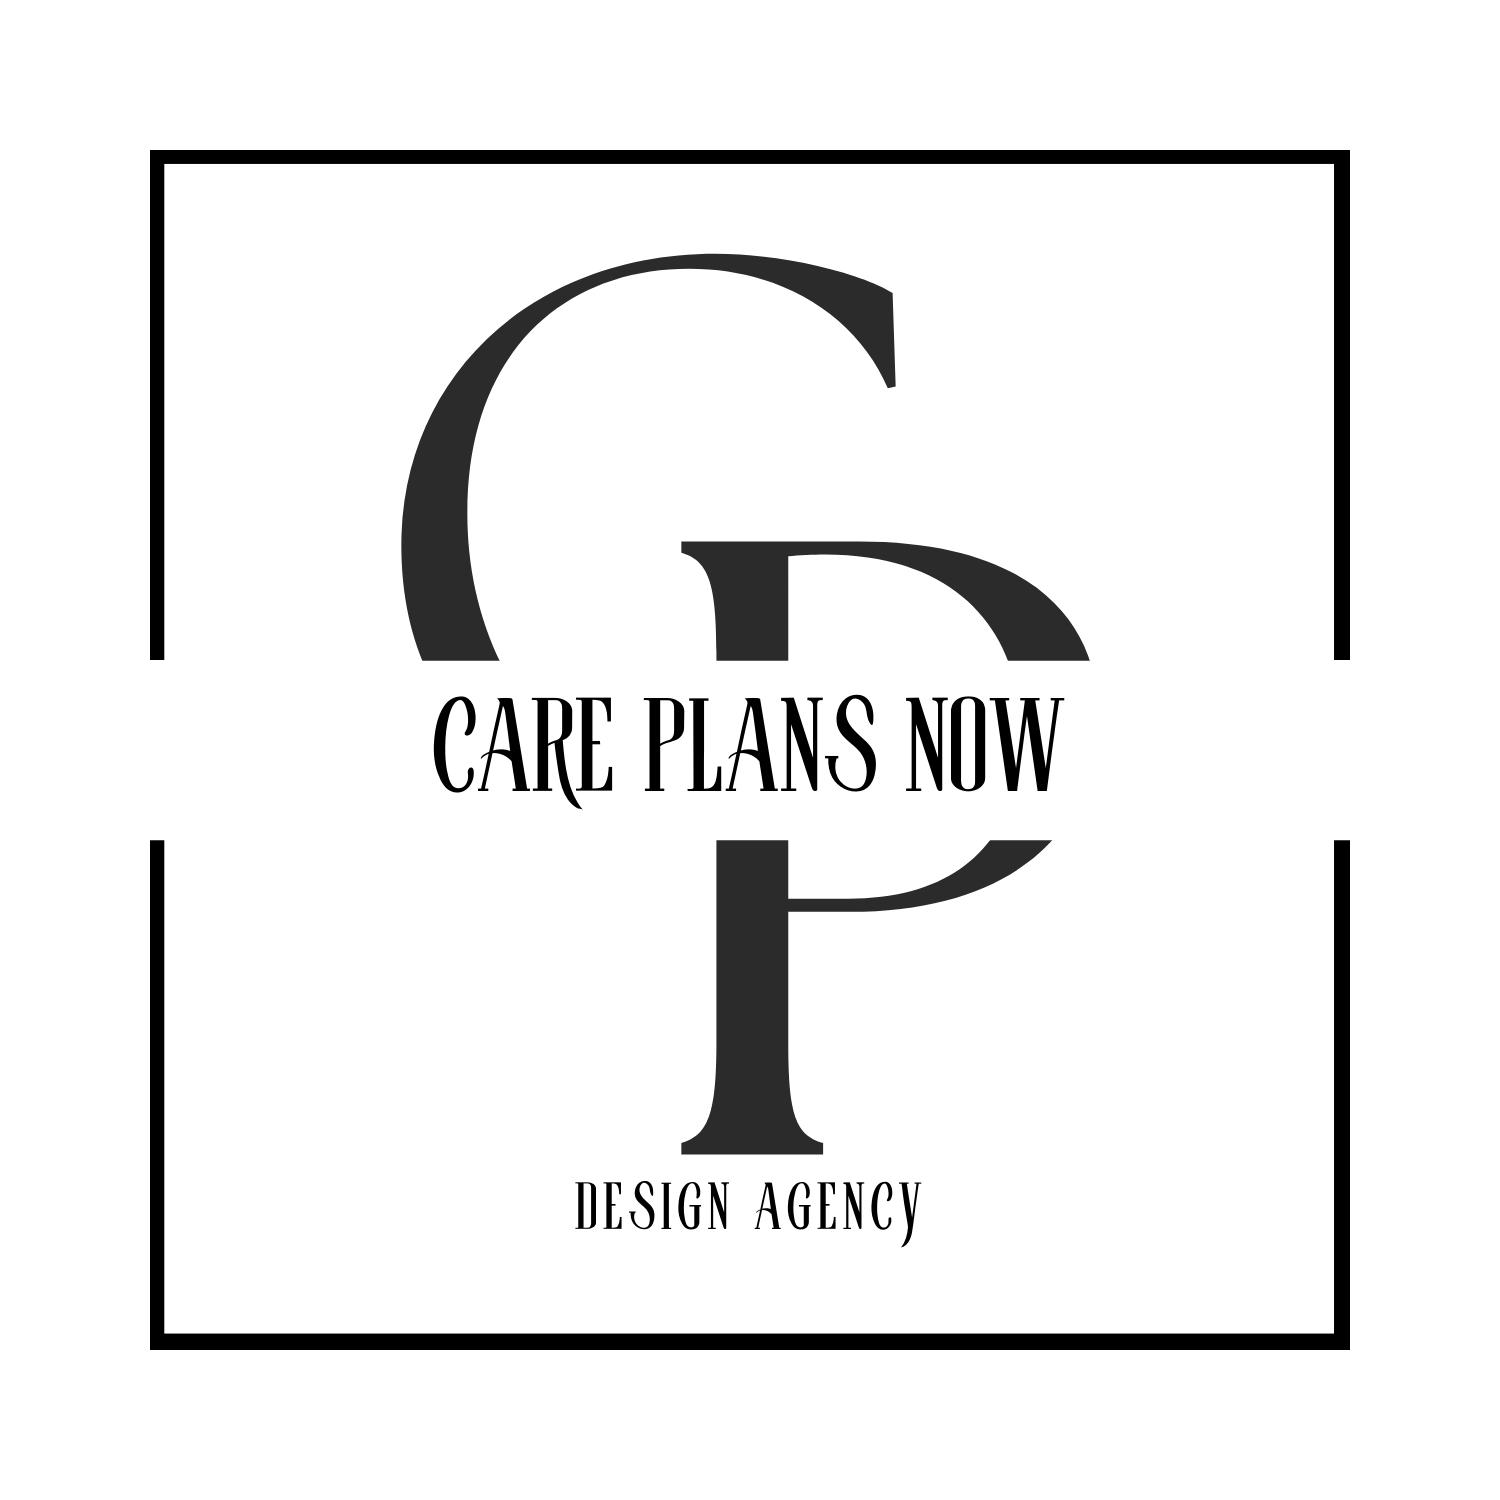 Care Plans Now